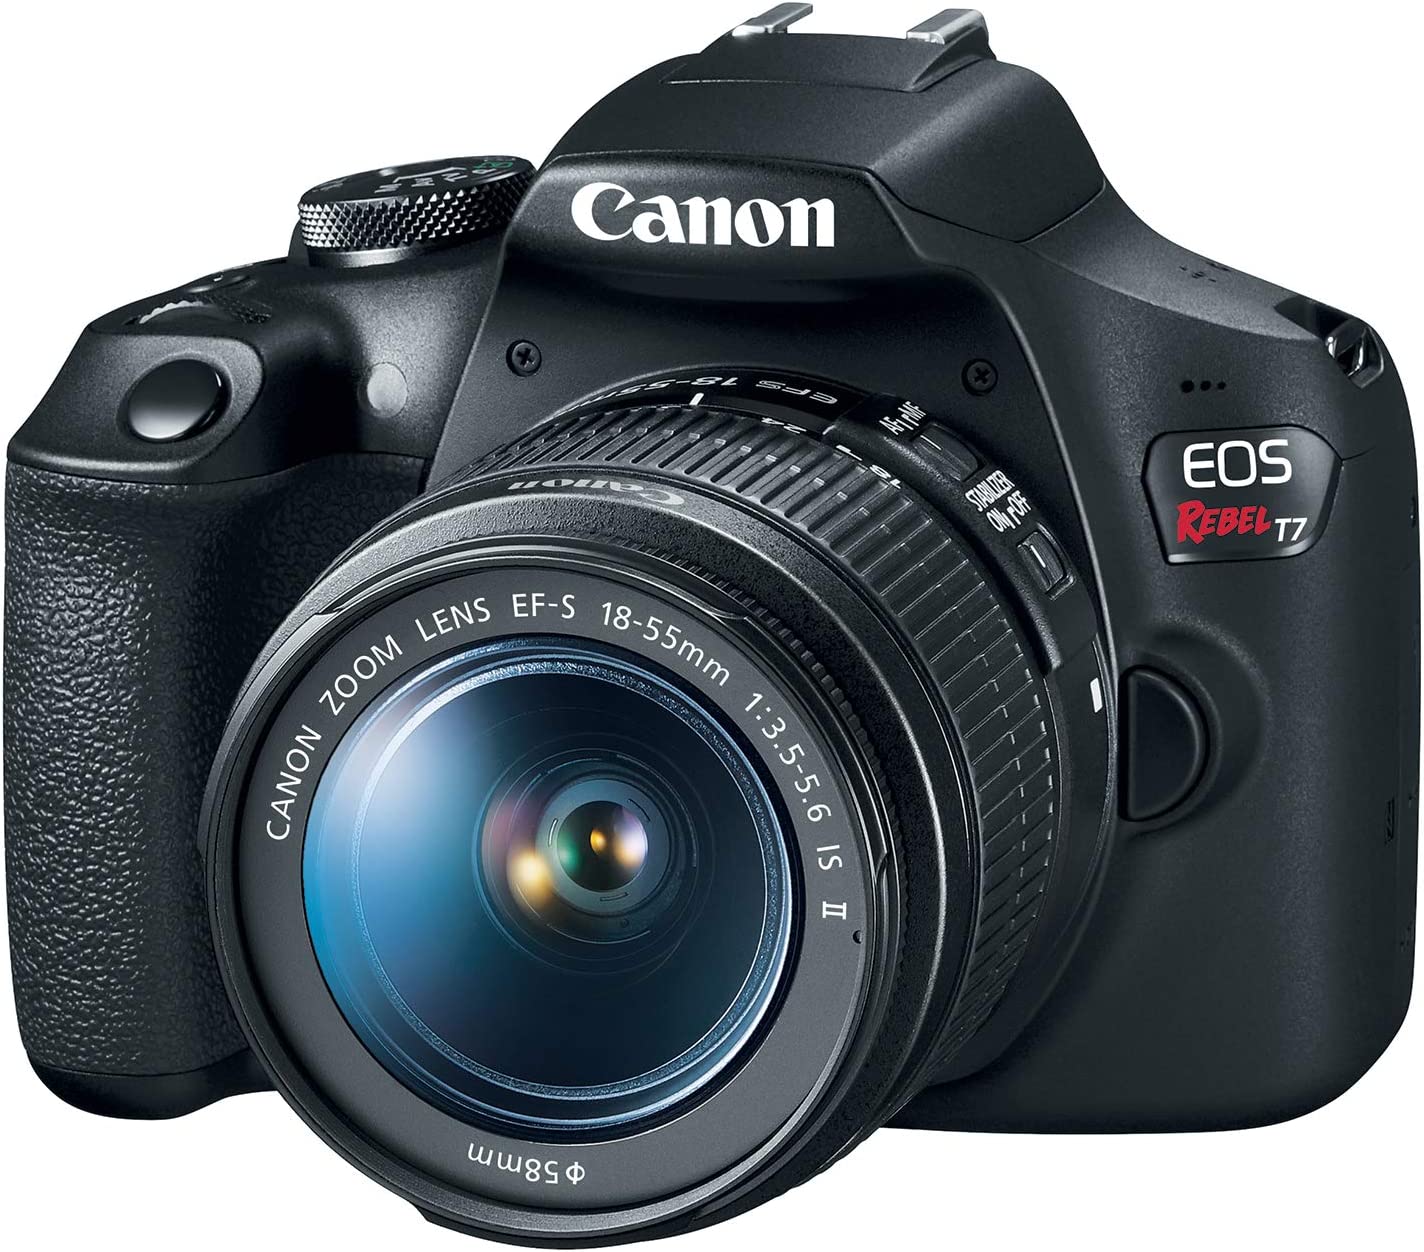 The Top 10 Best DSLR Cameras for Less Than $300